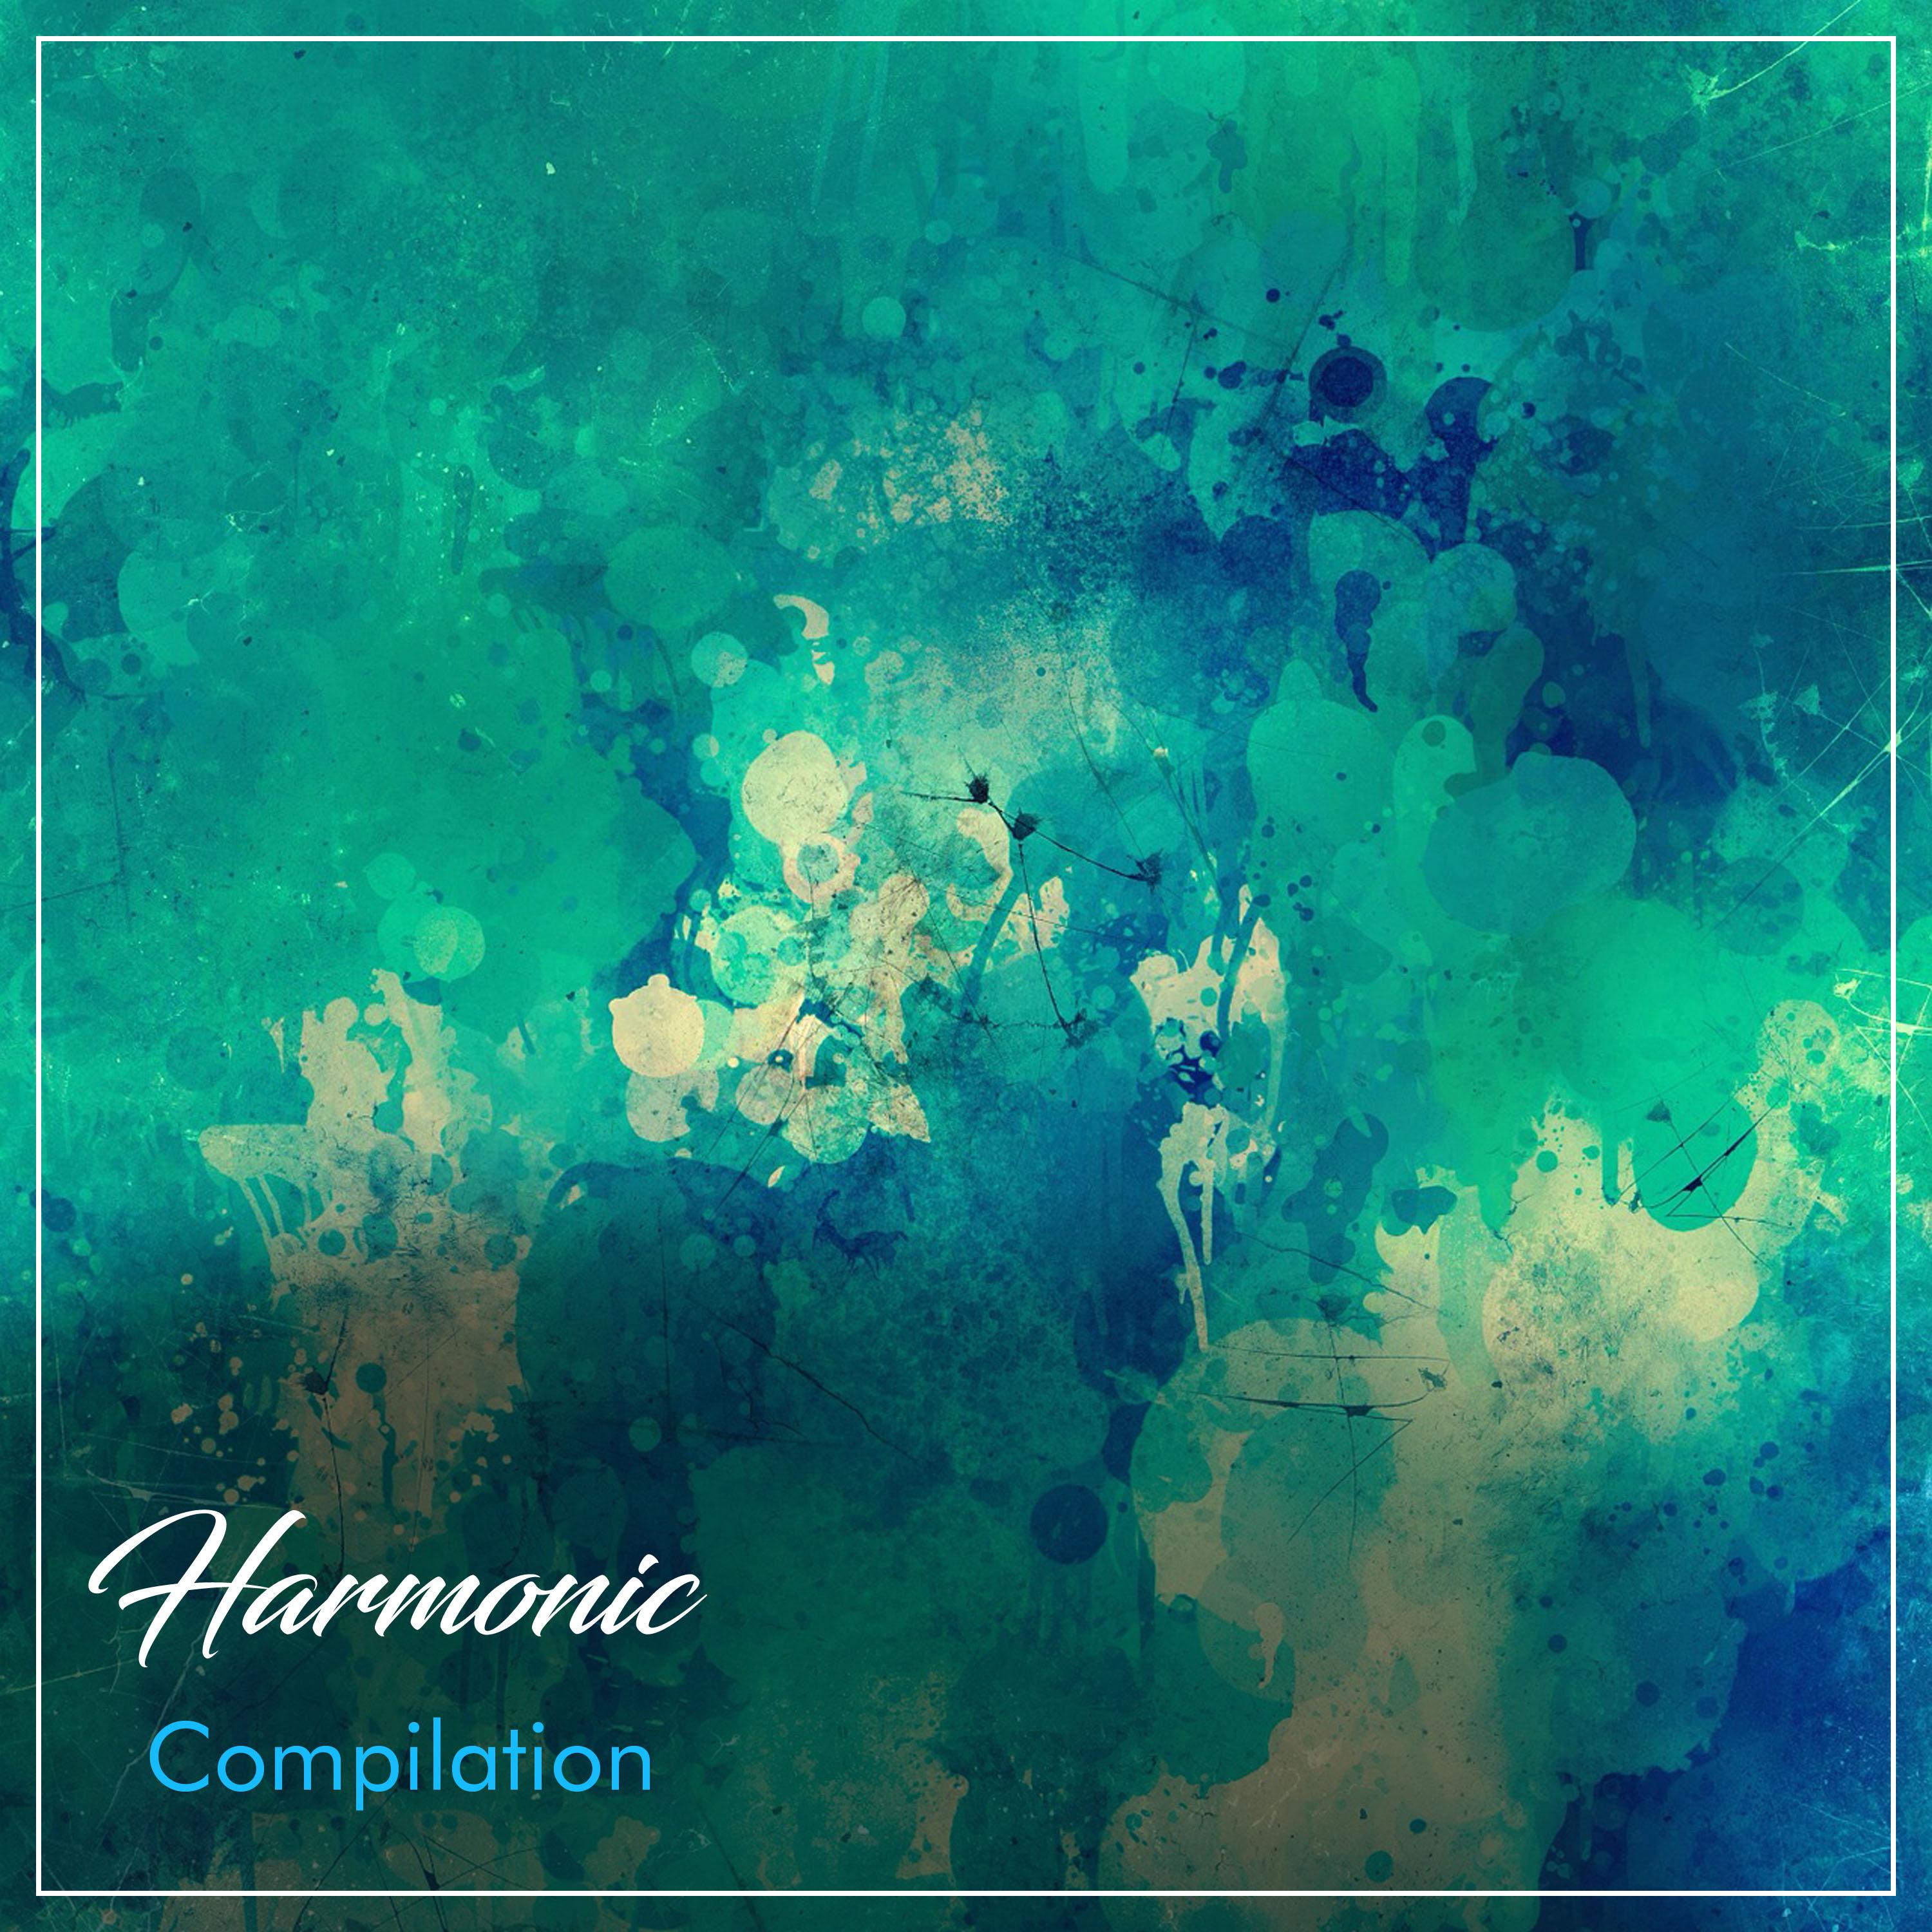 #19 Harmonic Compilation for Spa & Relaxation